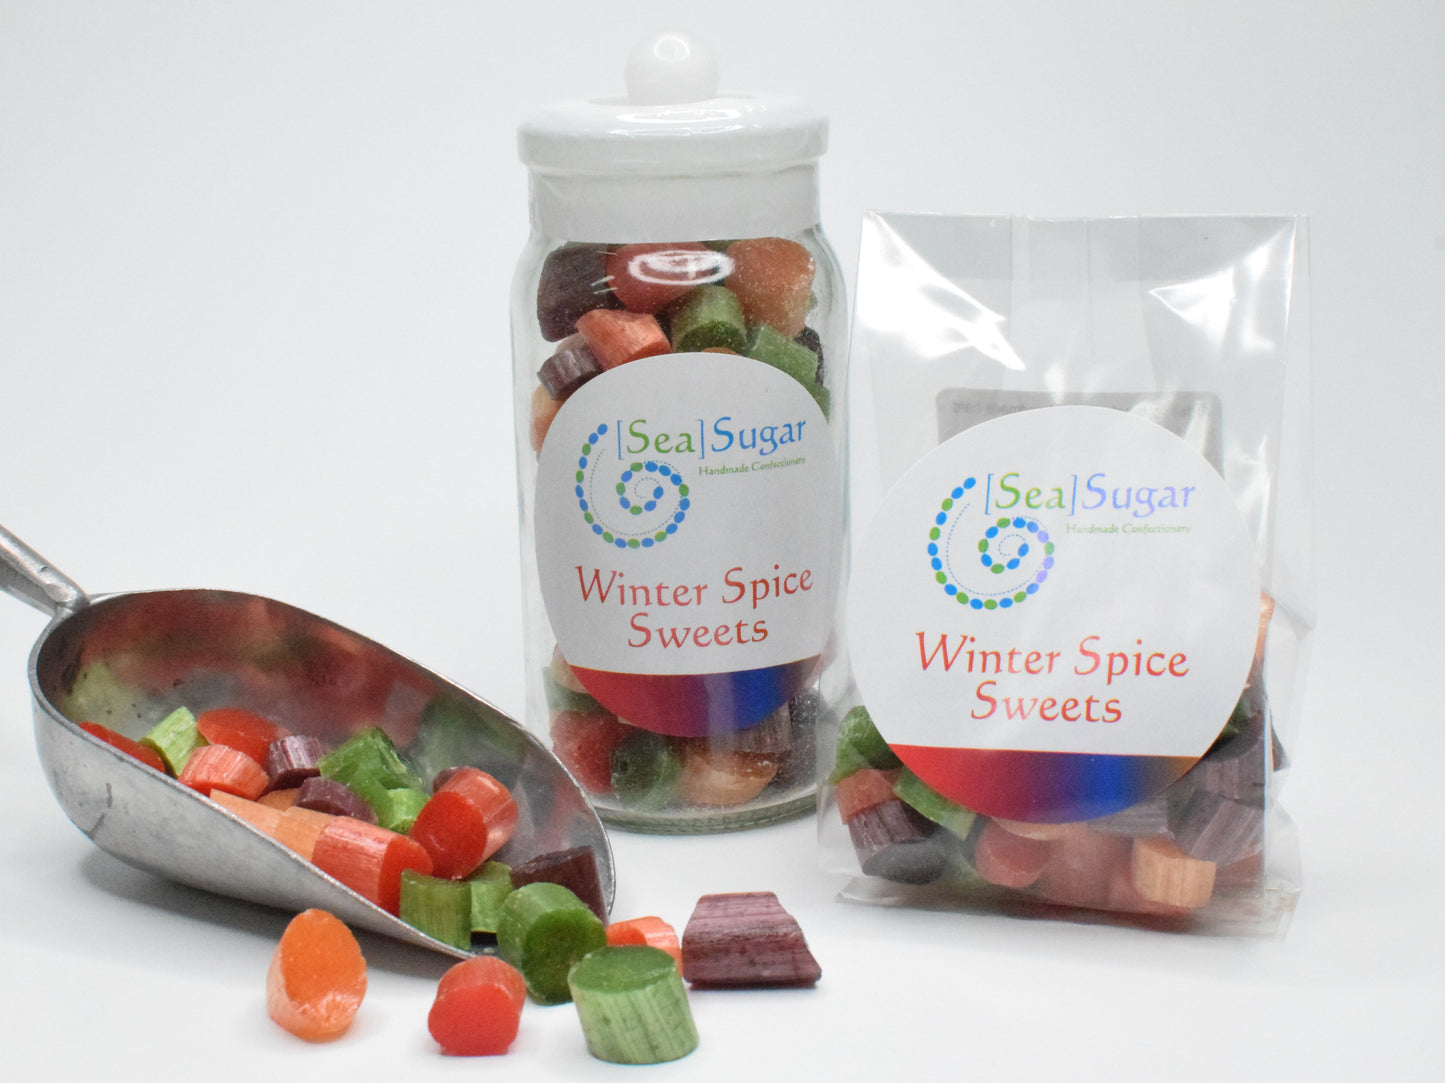 Winter Spice Sweets